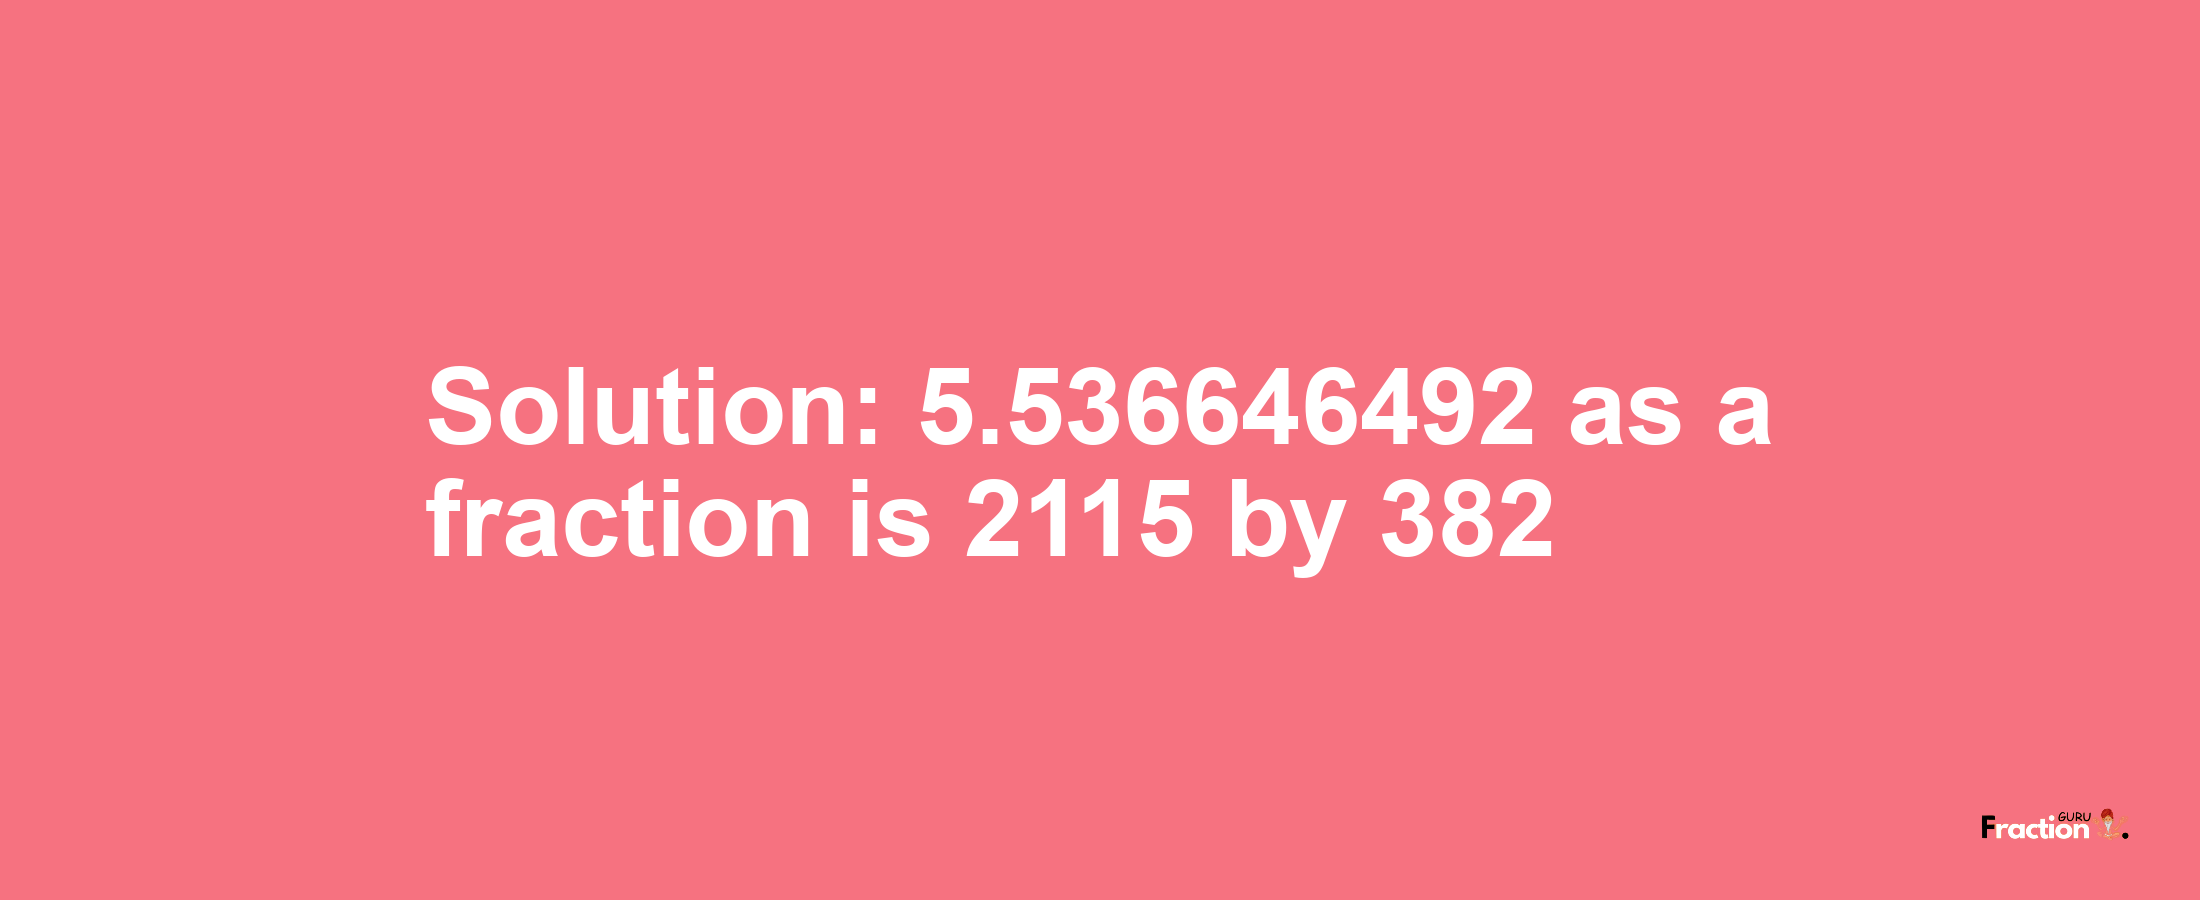 Solution:5.536646492 as a fraction is 2115/382